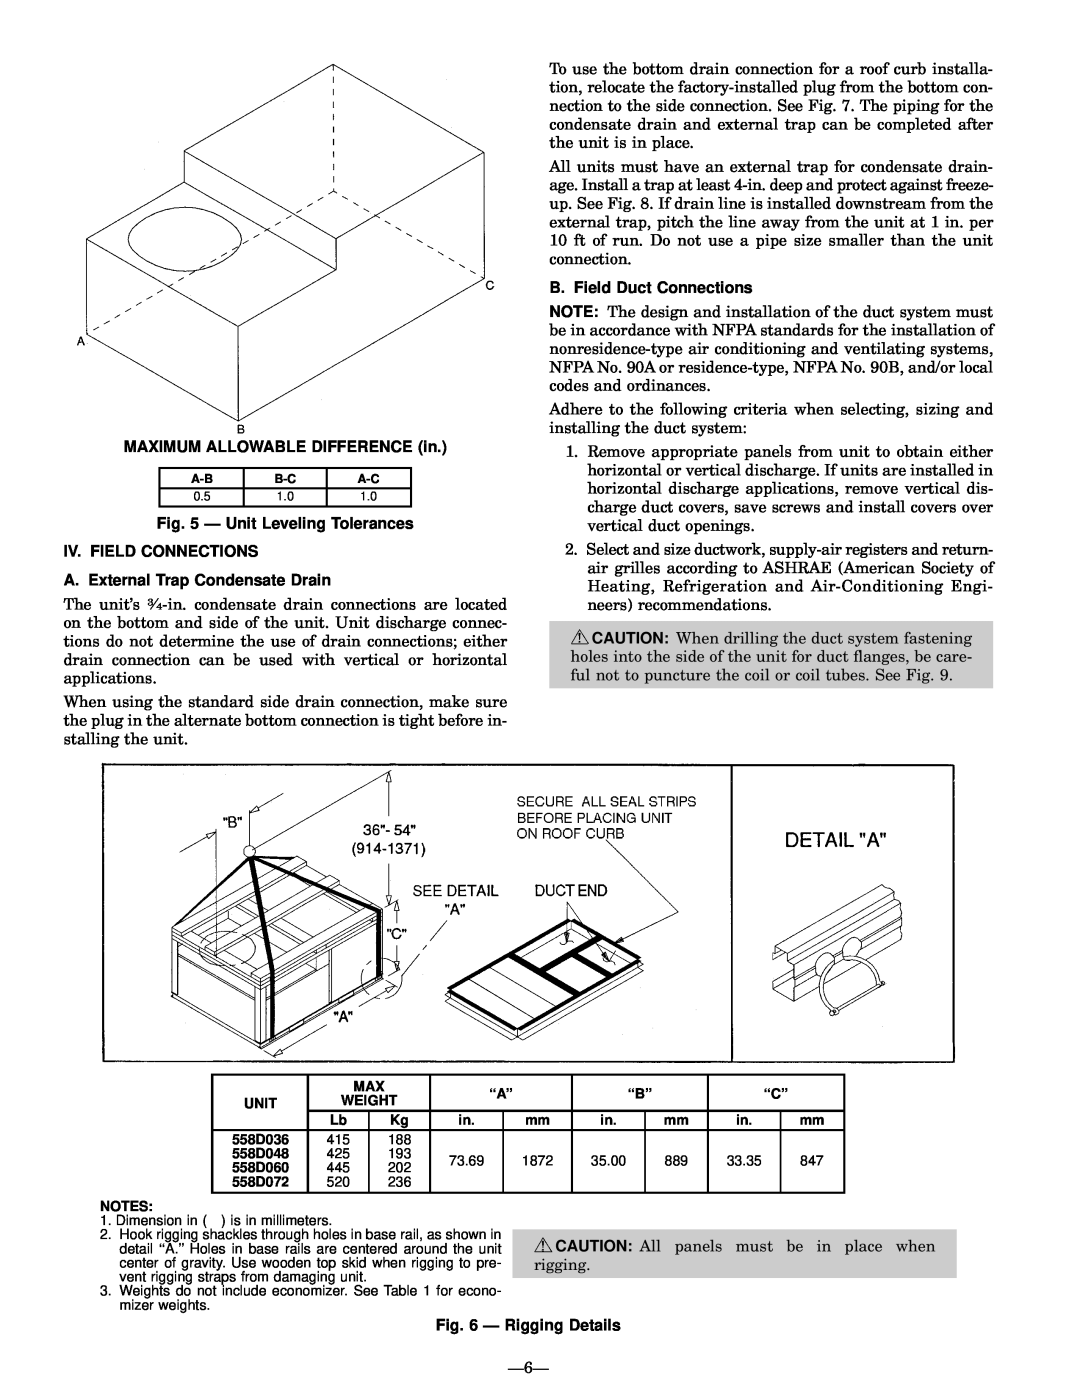 Bryant 558D MAXIMUM ALLOWABLE DIFFERENCE in, Ð Unit Leveling Tolerances, Iv. Field Connections, B. Field Duct Connections 